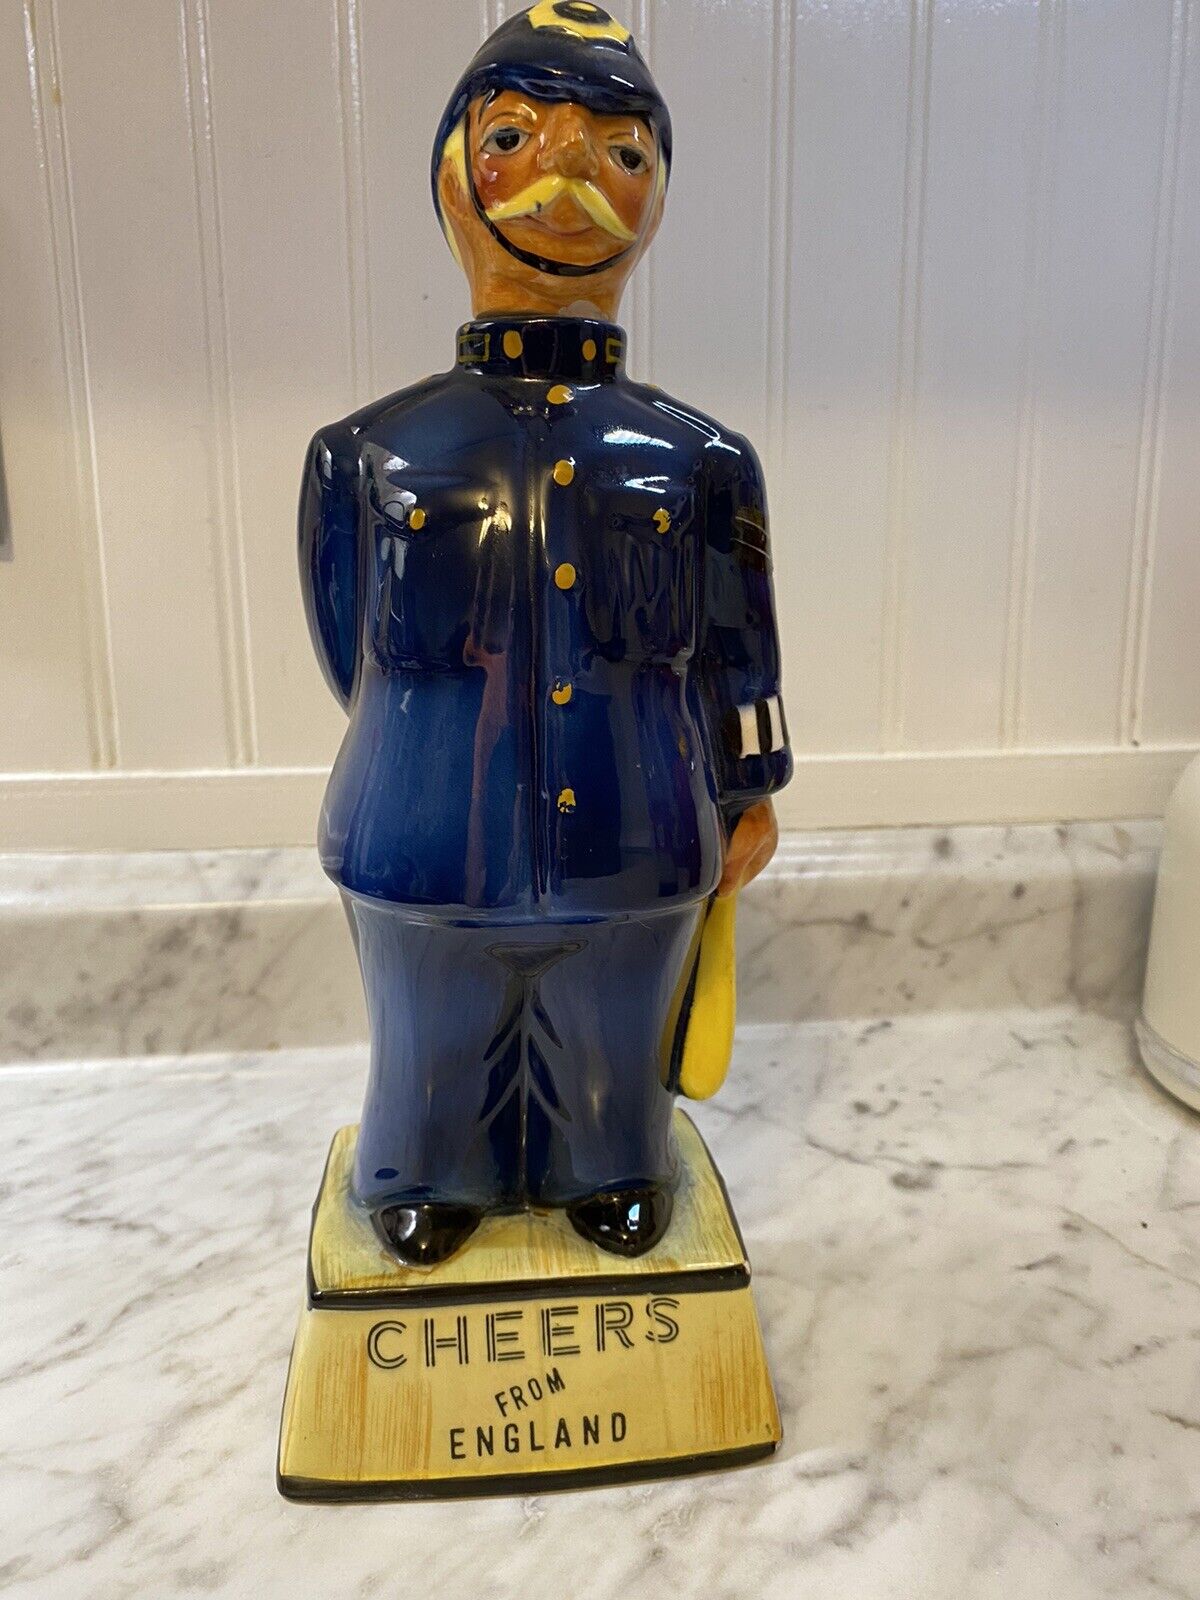 Vintage liquor bottle cheers from England ceramic police officer 